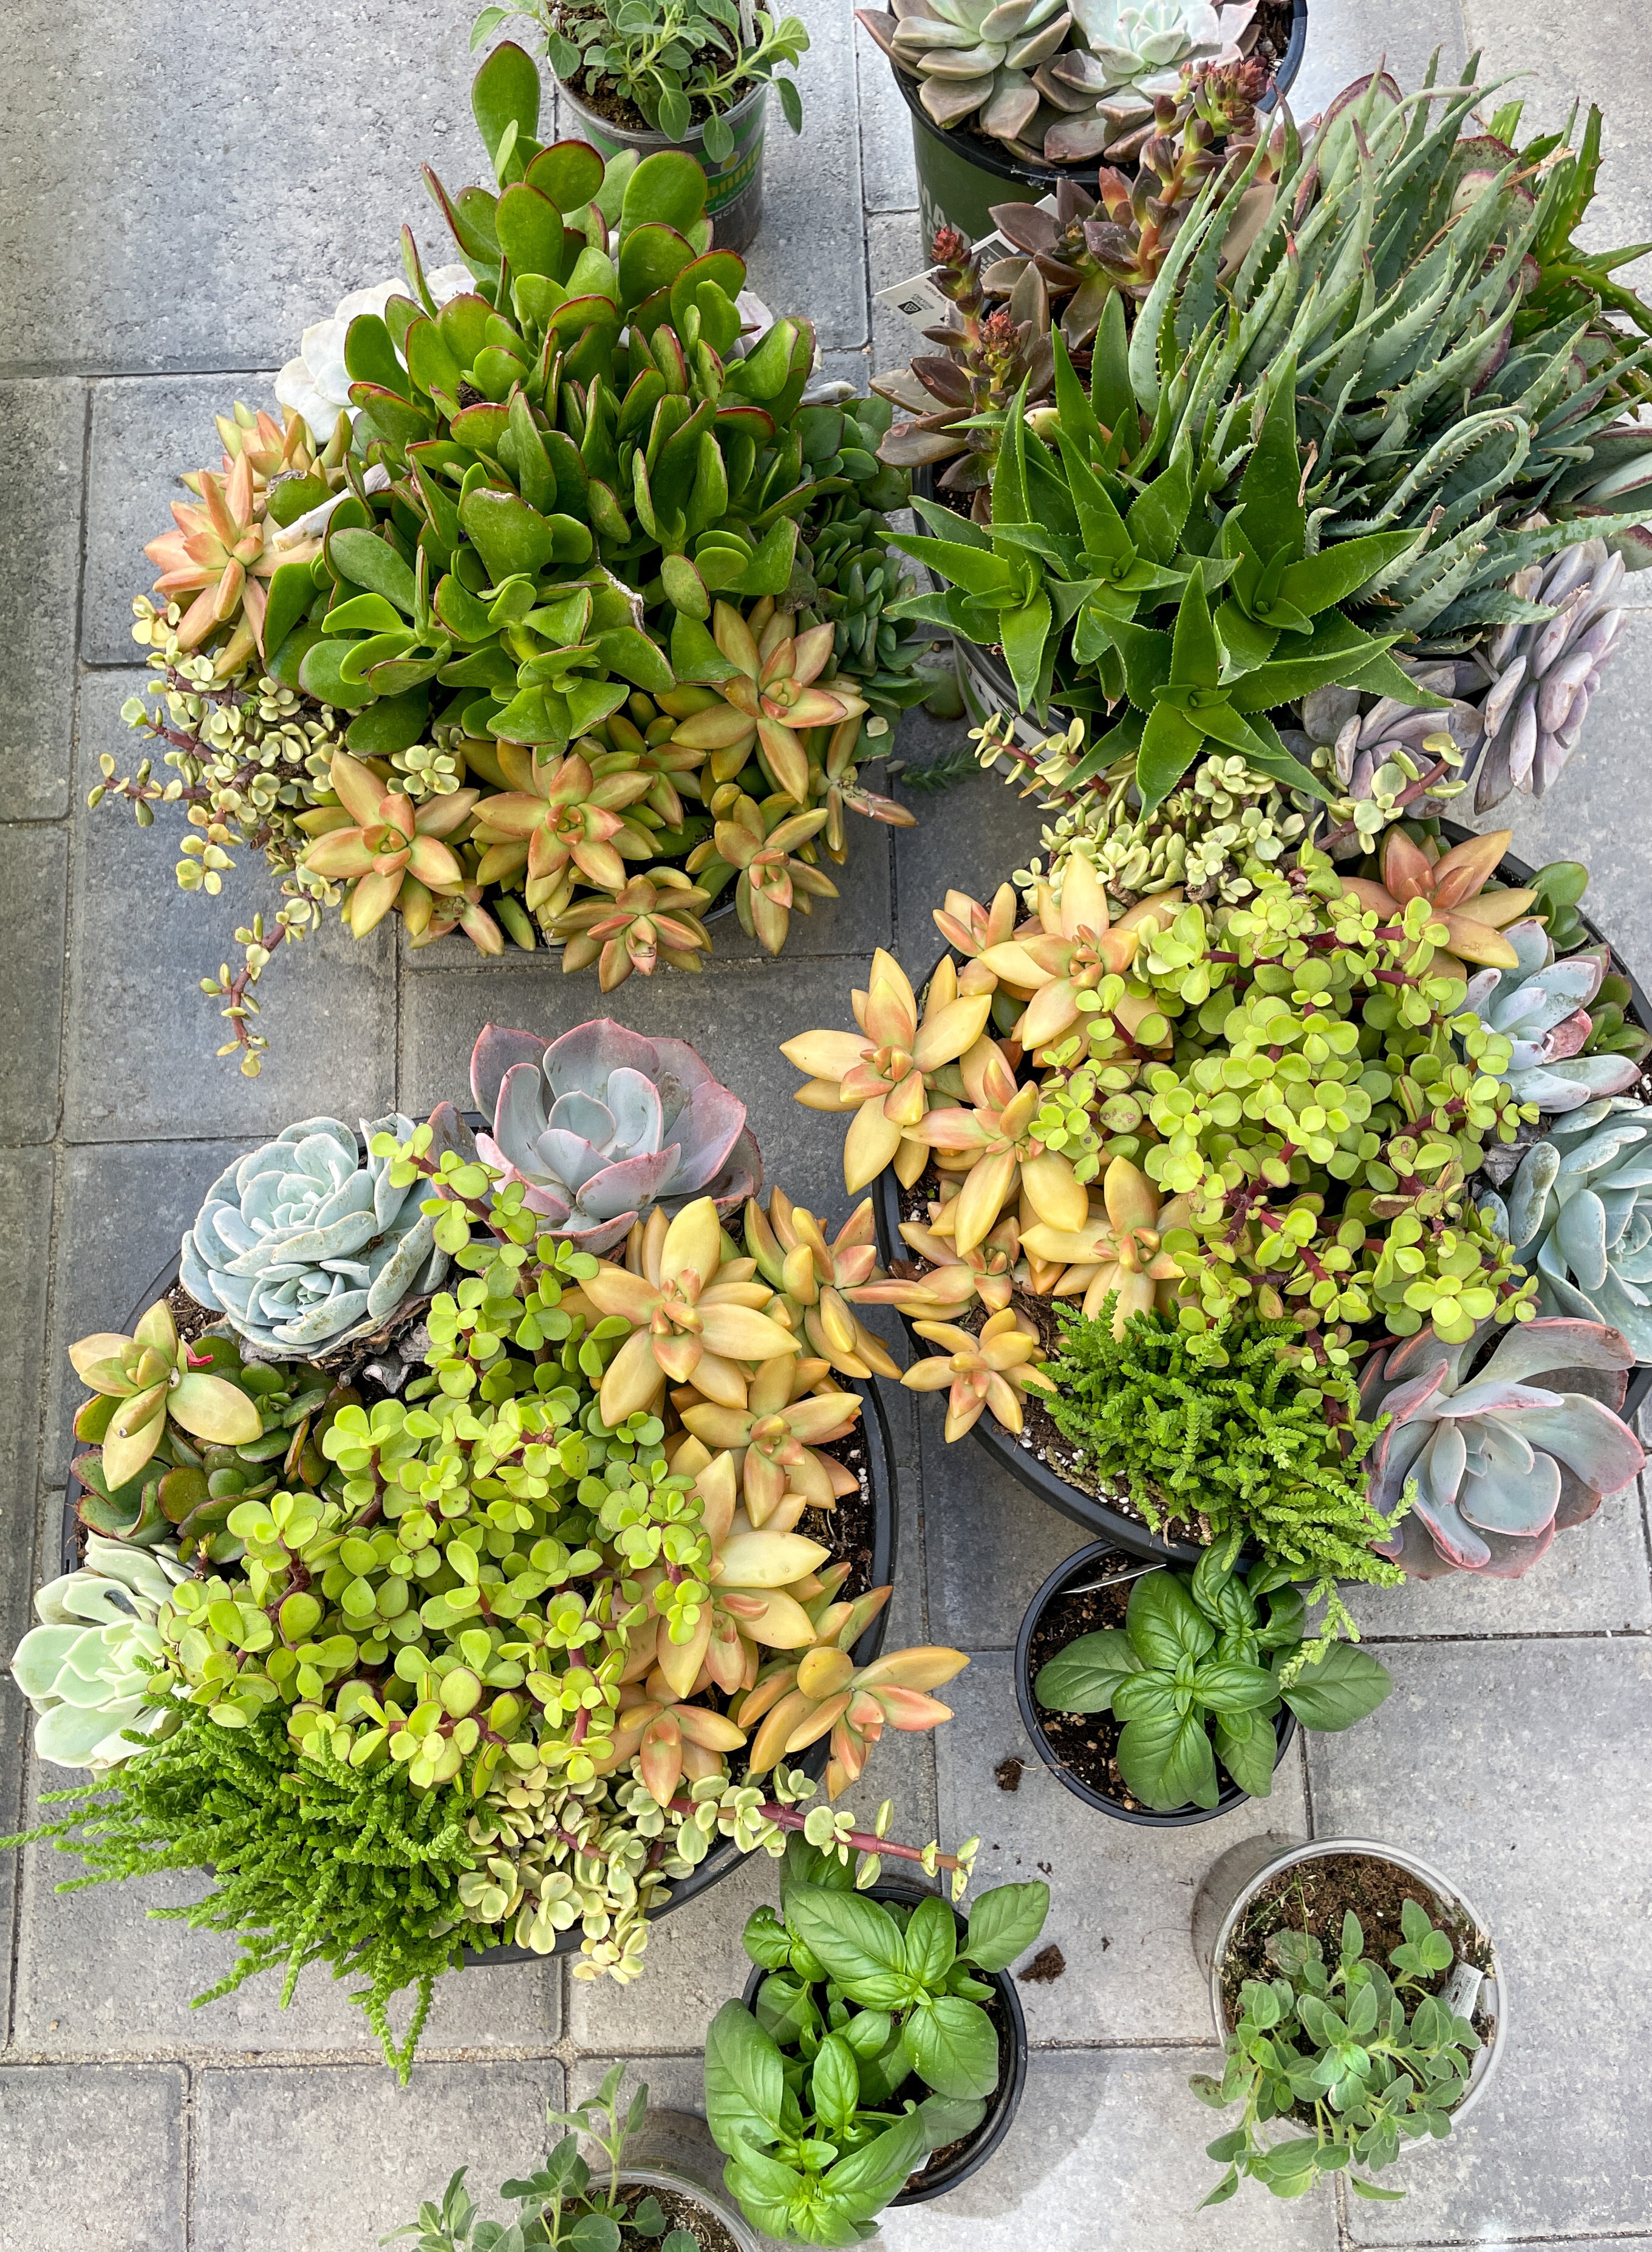 Several plastic pots filled with colorful succulent plants, sitting on top of concrete stones.